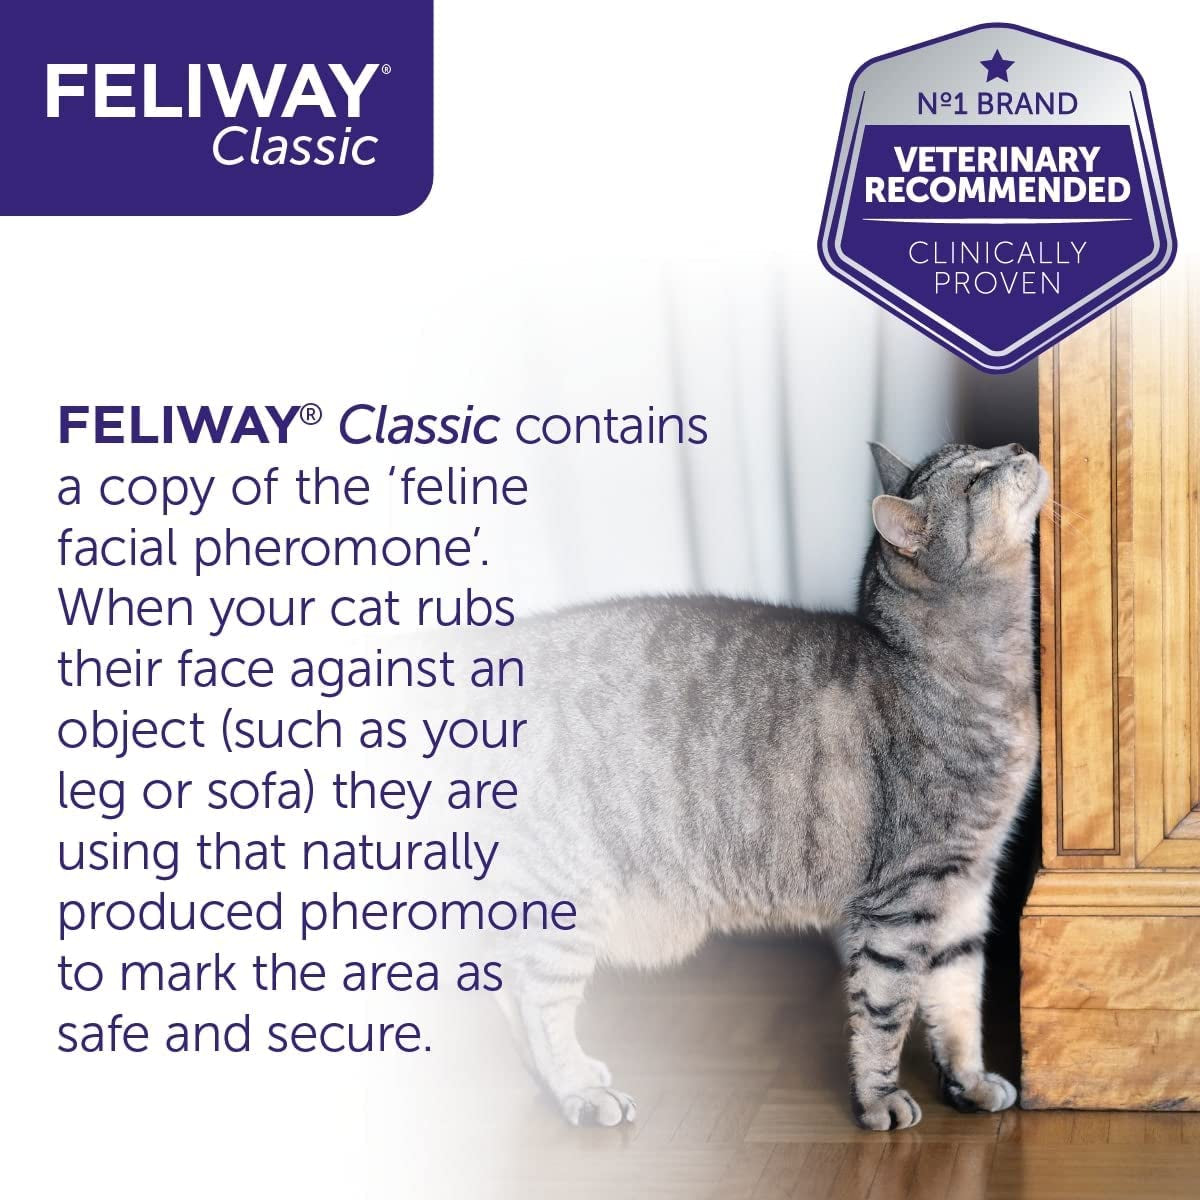 Classic 30 Day Refill Comforts Cats, Helps Solve Behavioural Issues and Stress/Anxiety in the Home - 48Ml